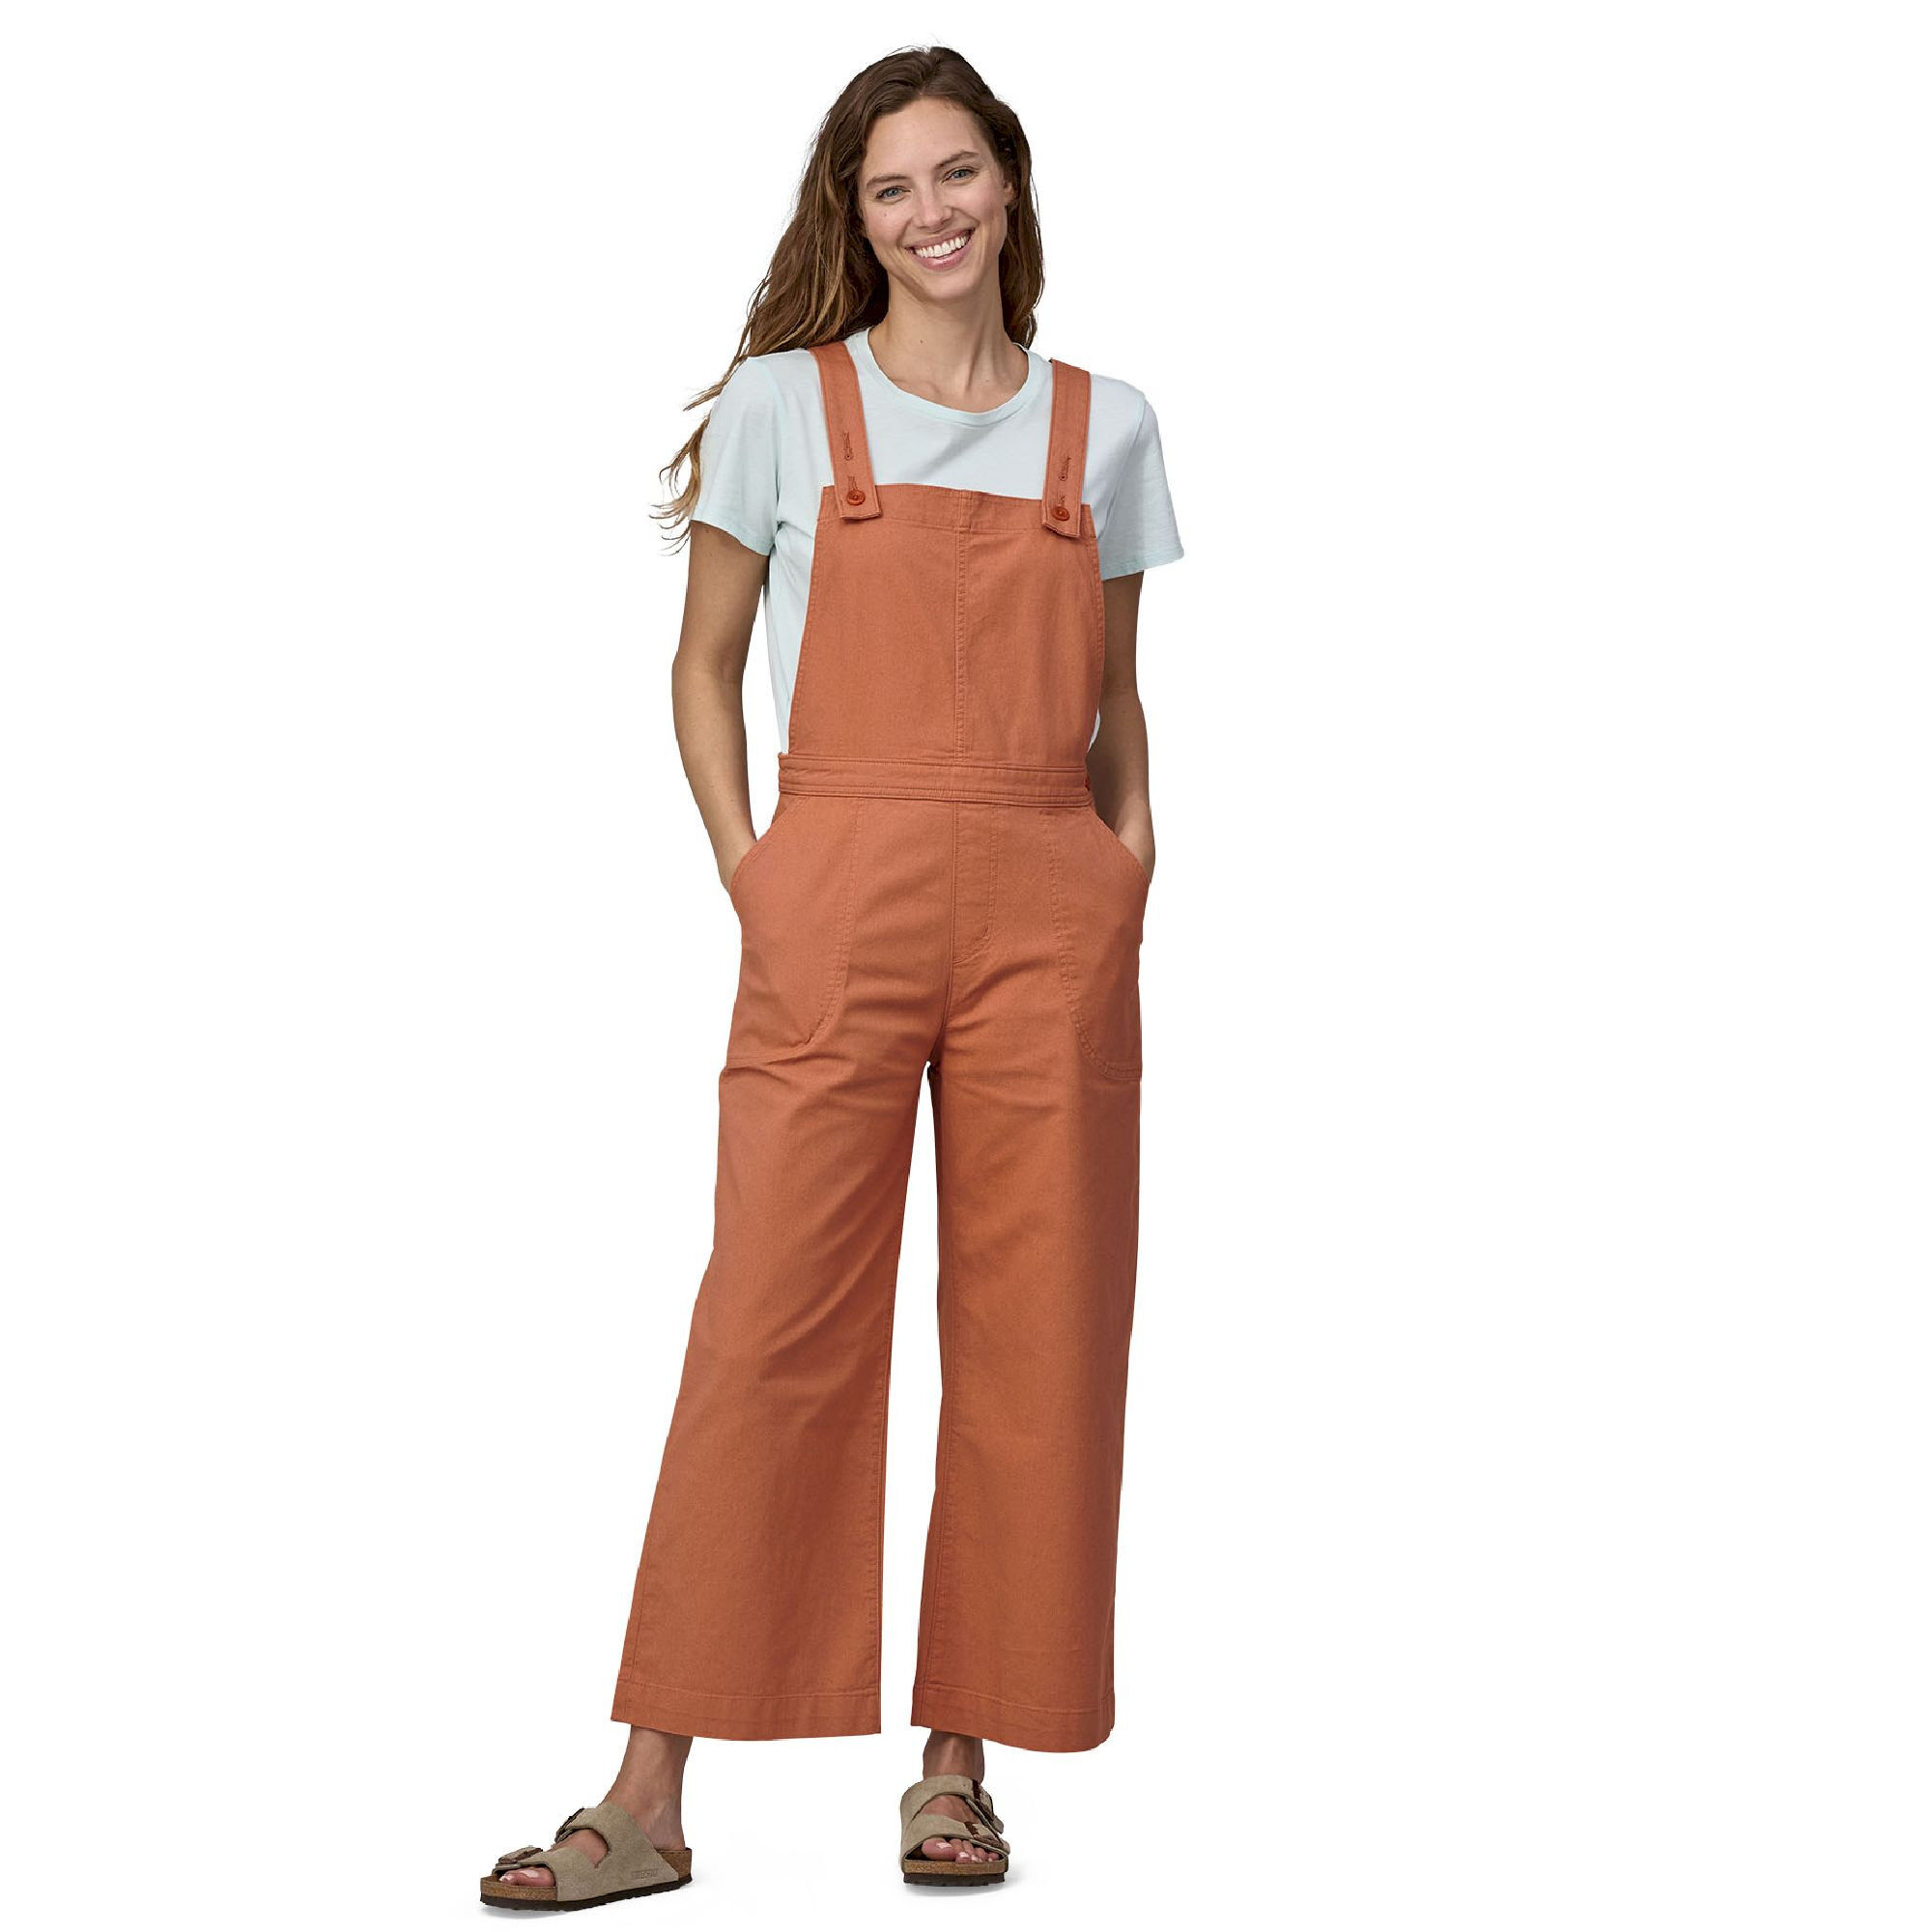 Patagonia Stand Up Cropped Overalls - Dámské kalhoty | Hardloop